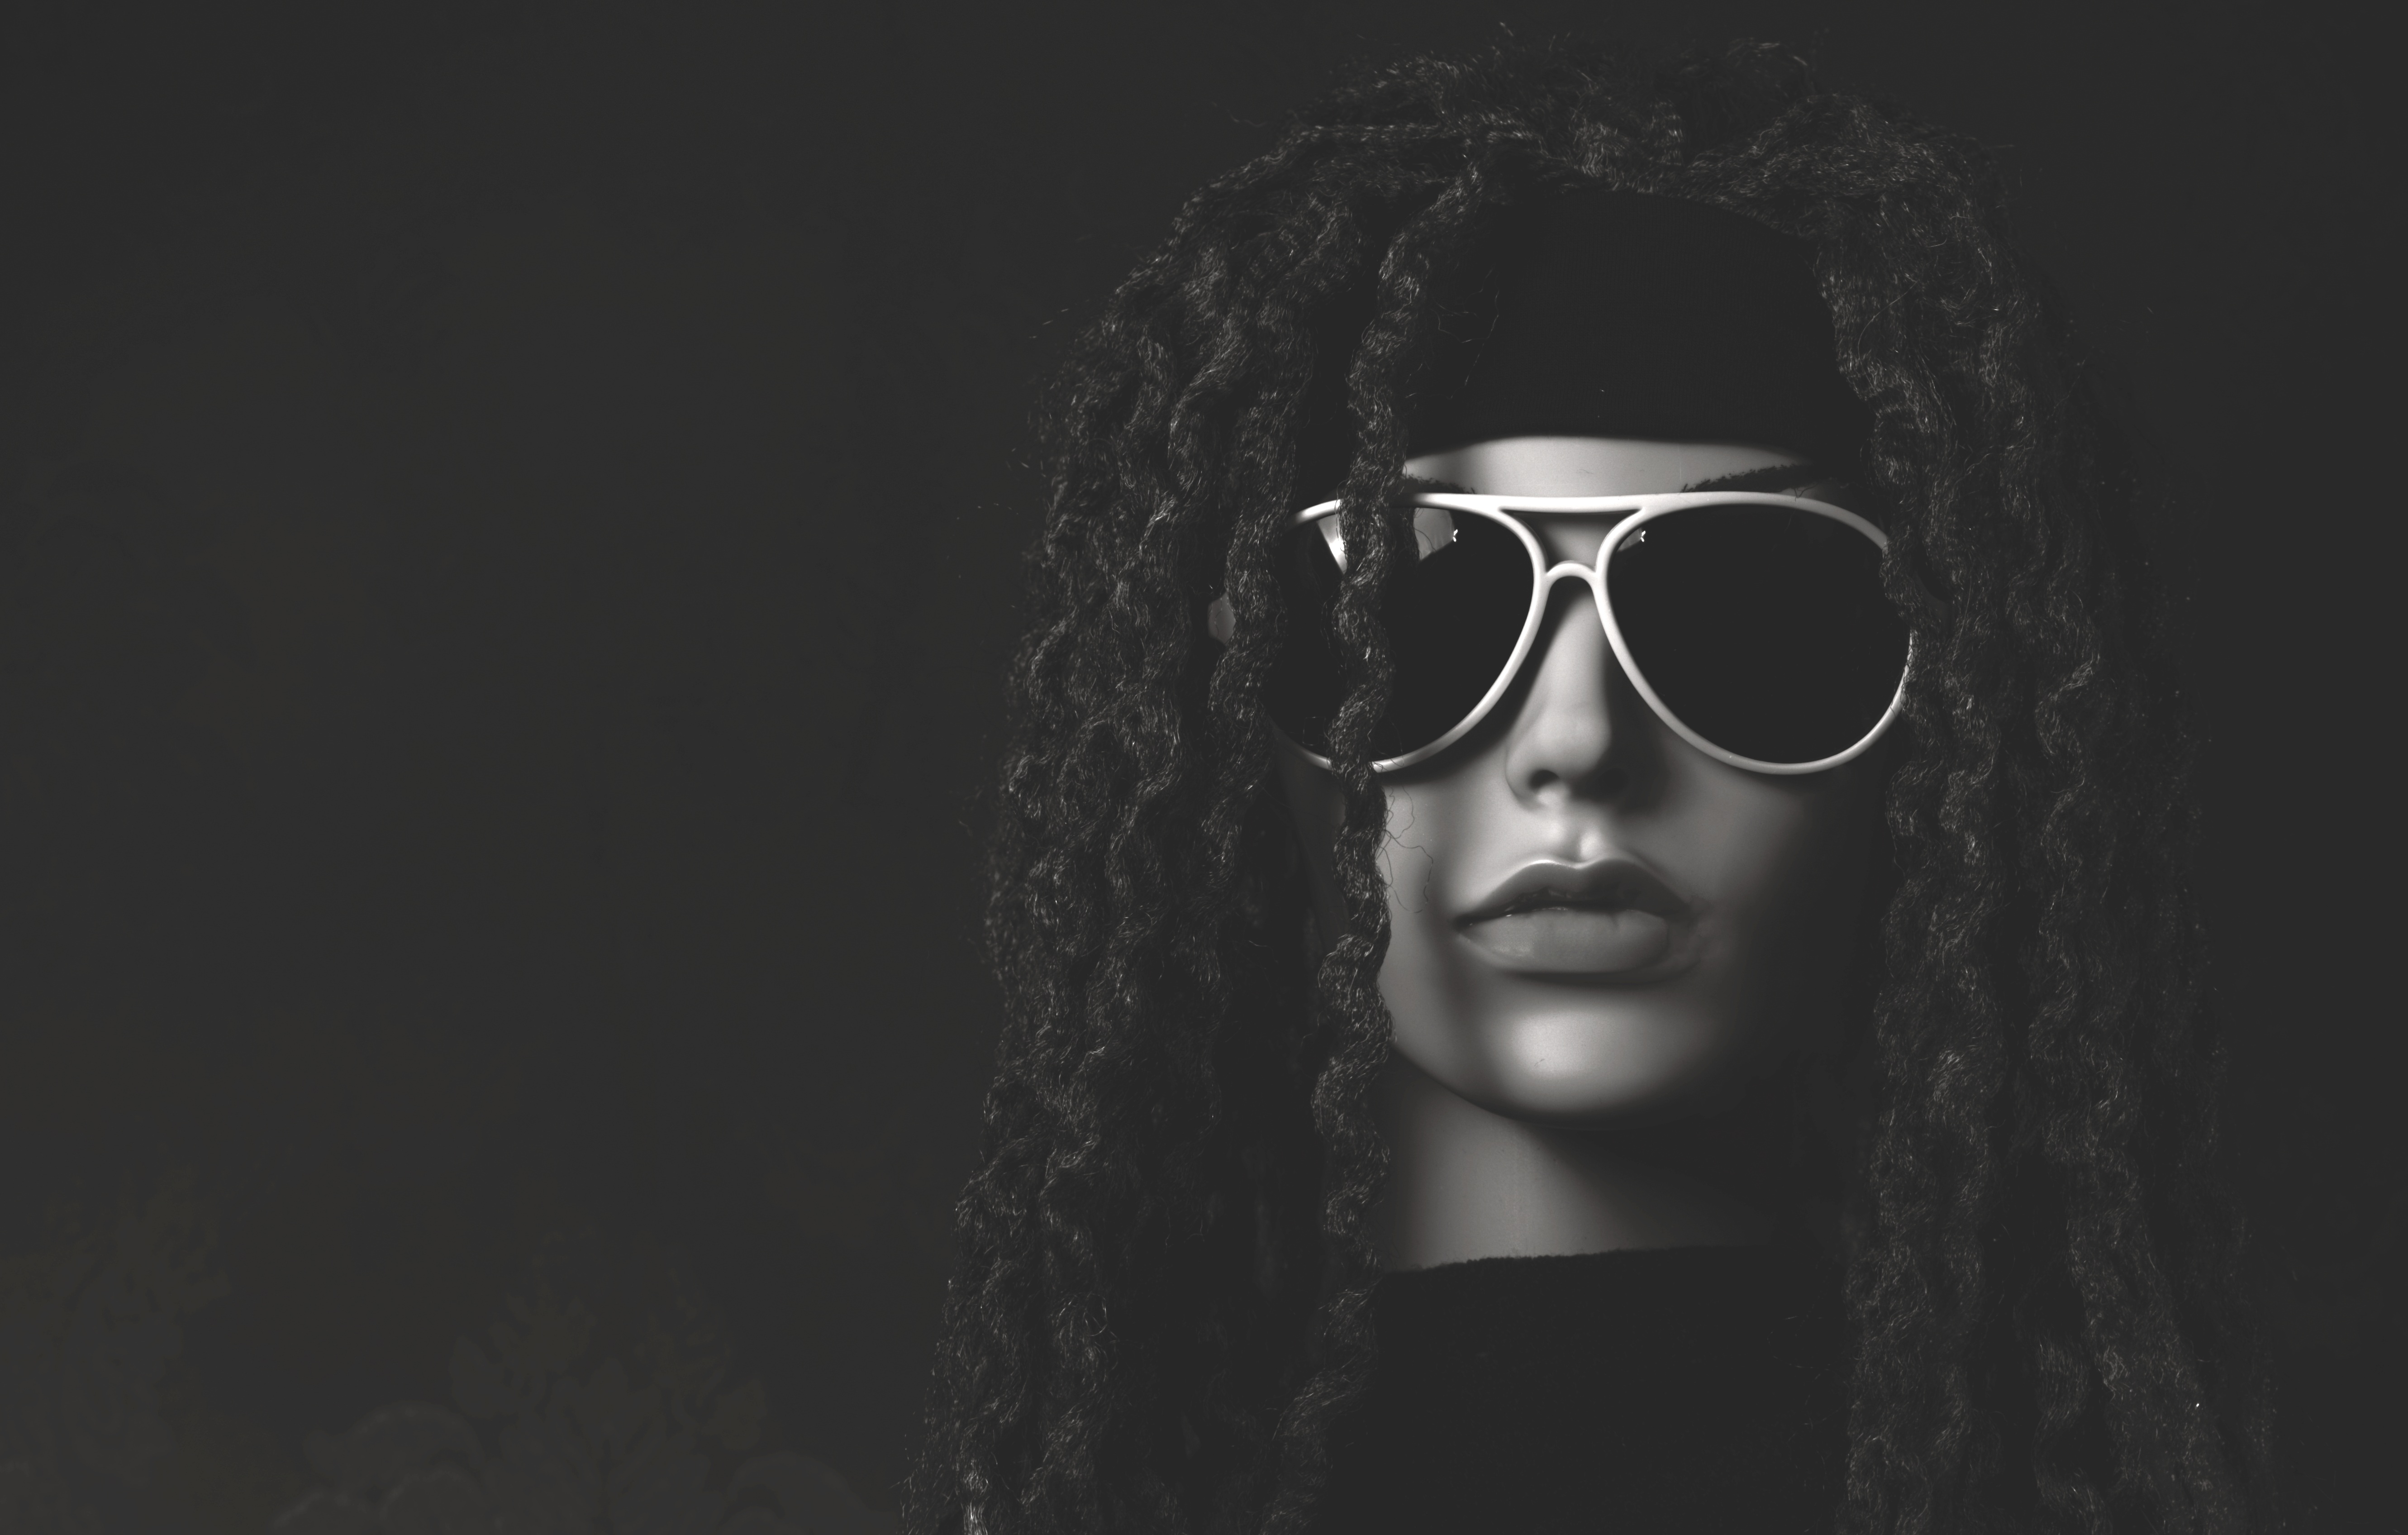 96441 Screensavers and Wallpapers Portrait for phone. Download black, bw, chb, portrait, glasses, spectacles, dummy, mannequin, dreadlocks pictures for free